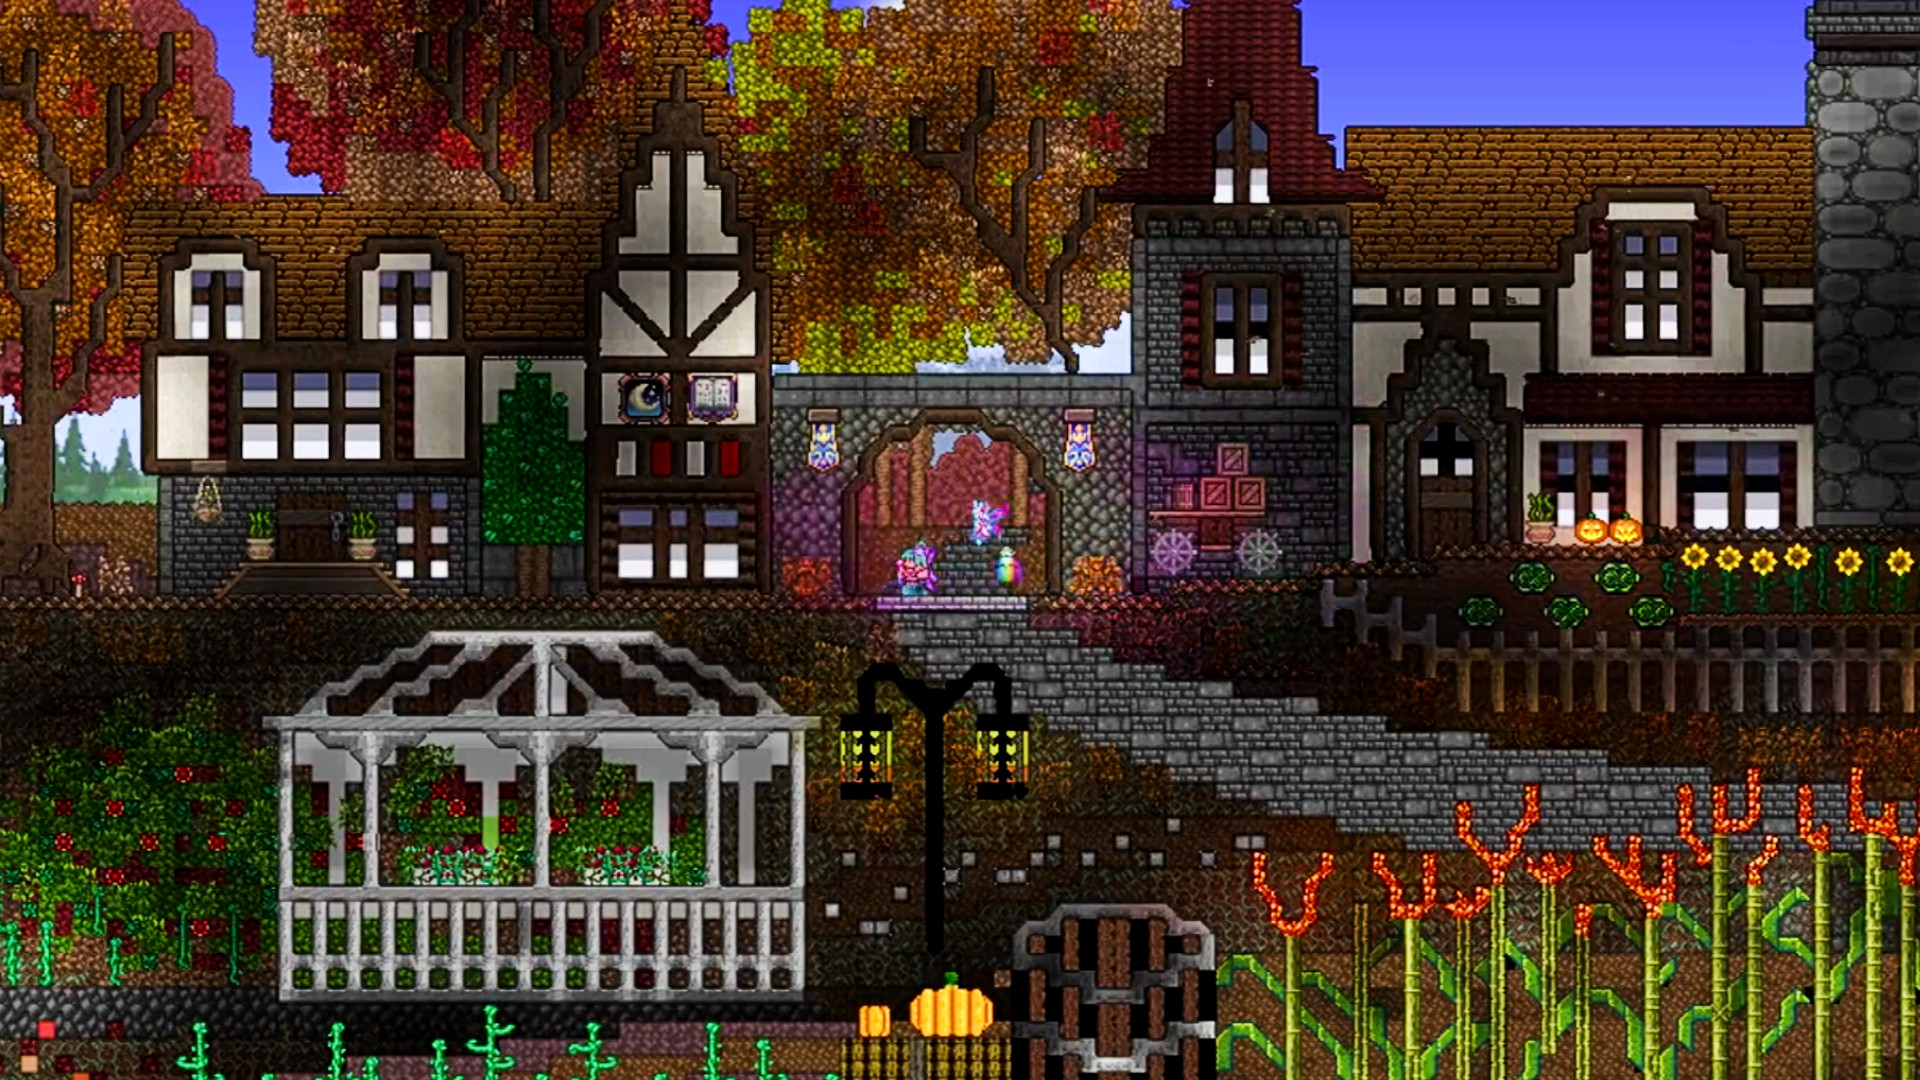 Stunning Terraria build looks like completely different game